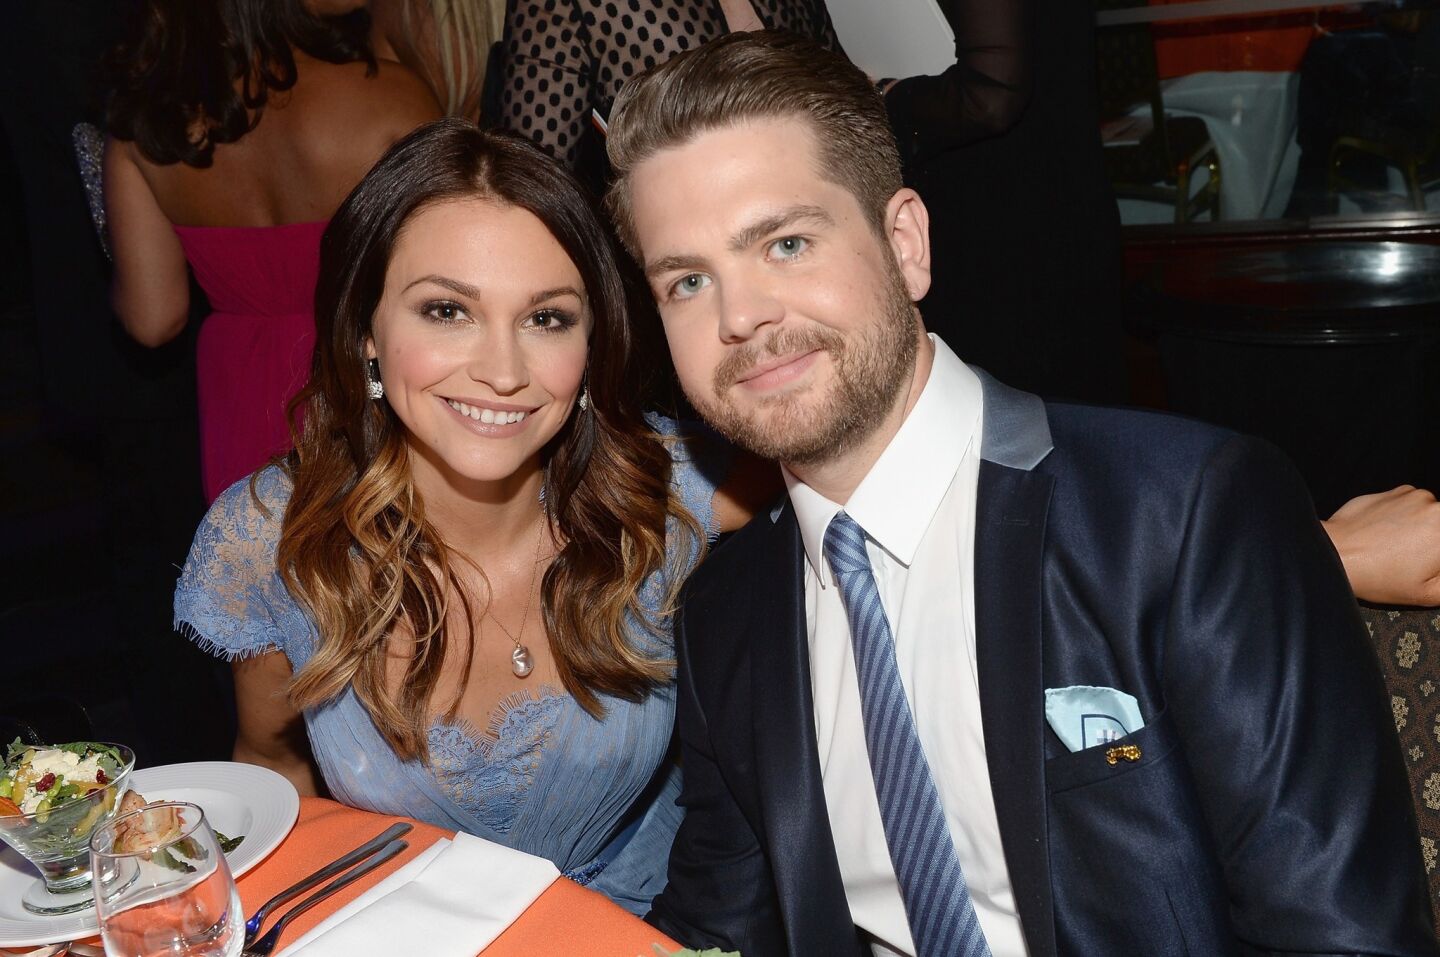 Jack Osbourne, son of British rocker Ozzy Osbourne and "The Talk" host Sharon Osbourne, will take on sleepless nights again. He welcomed his second child, Andy Rose Osbourne, with his wife, Lisa Stelly. The couple welcomed their first child, a girl named Pearl, in April 2012.